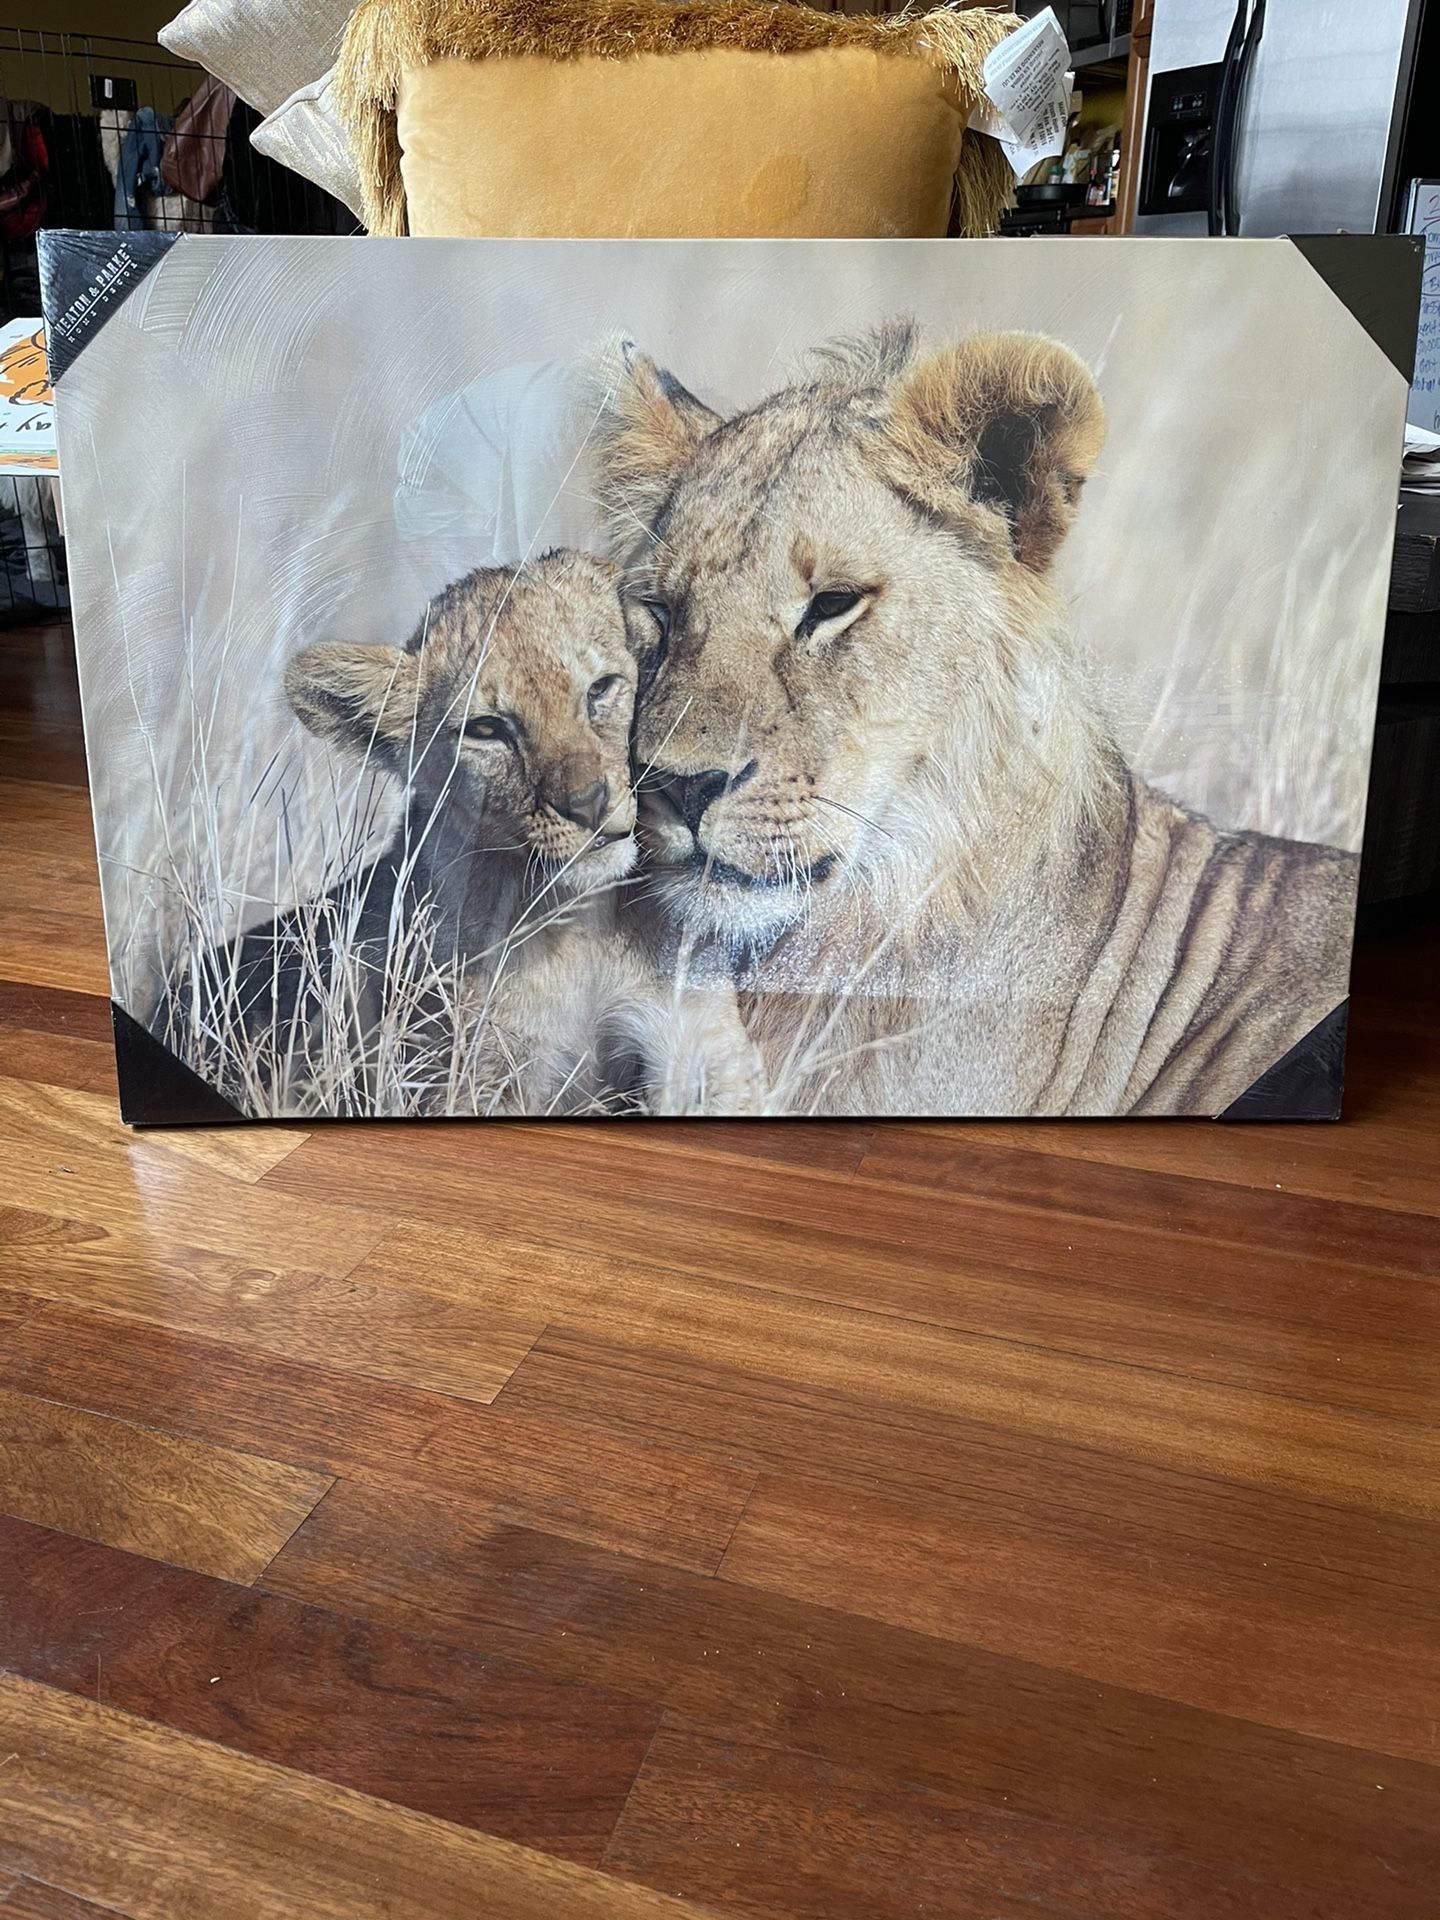 Lion And Lioness